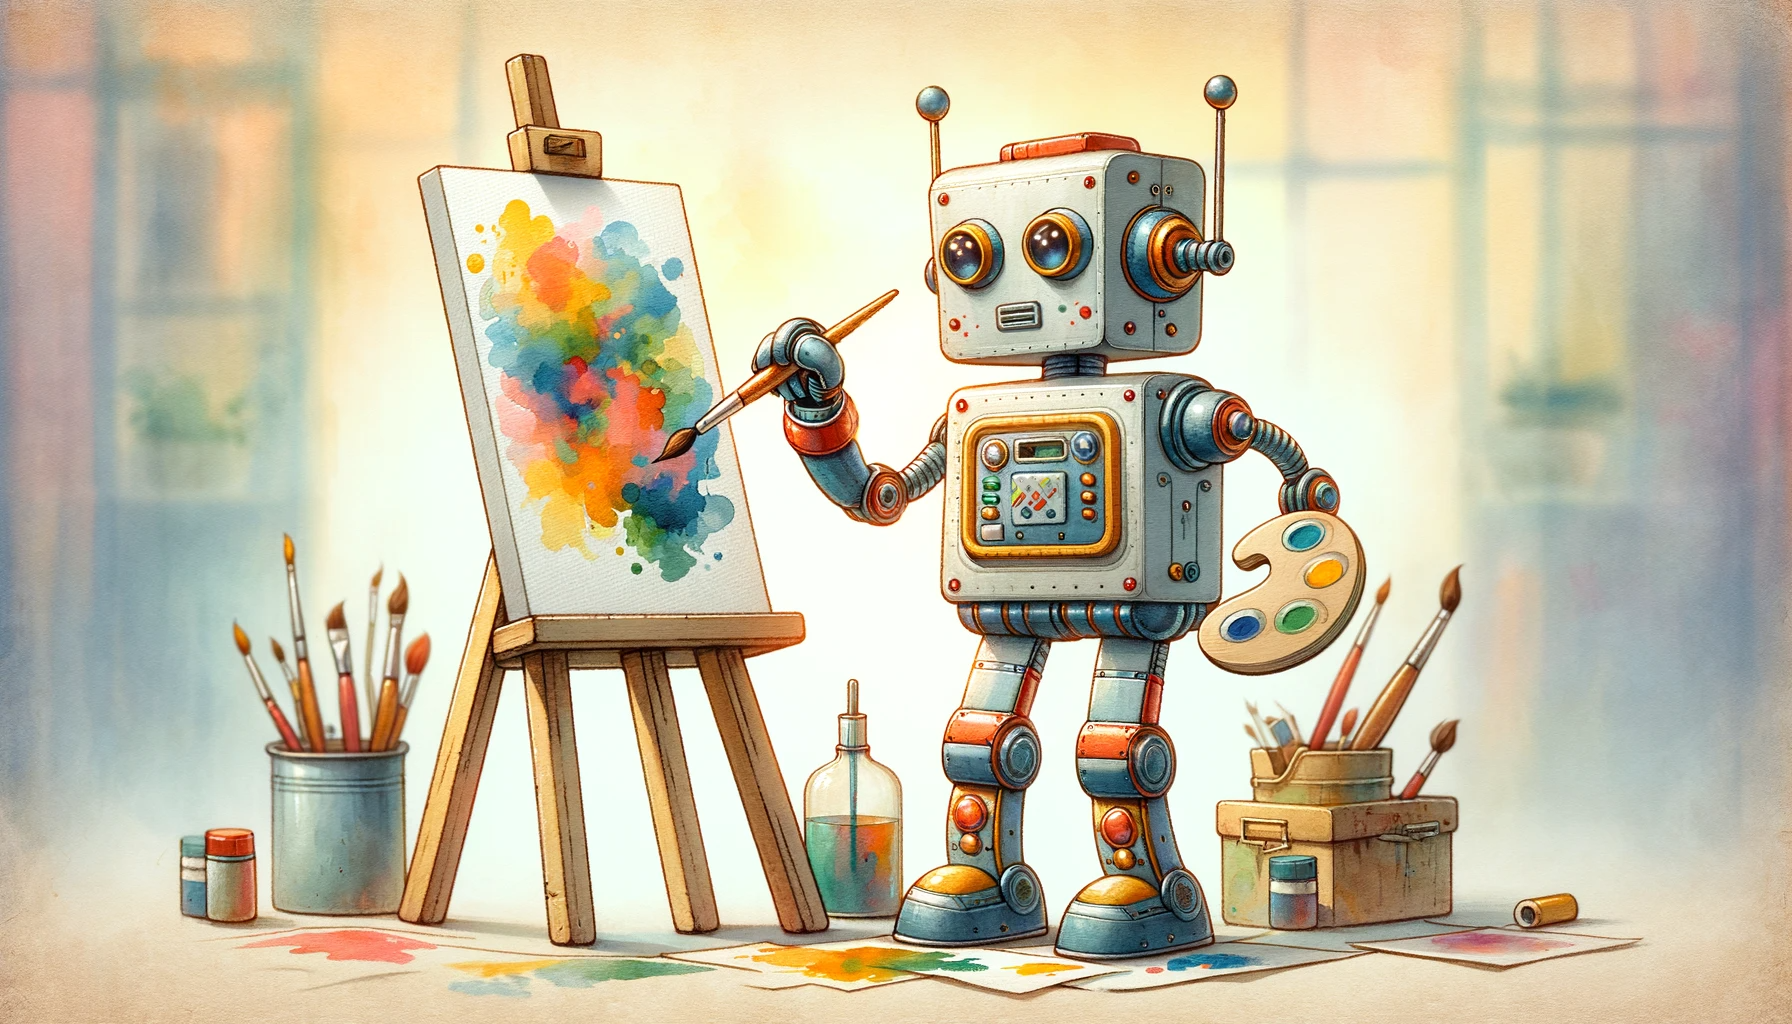 A Robot painting